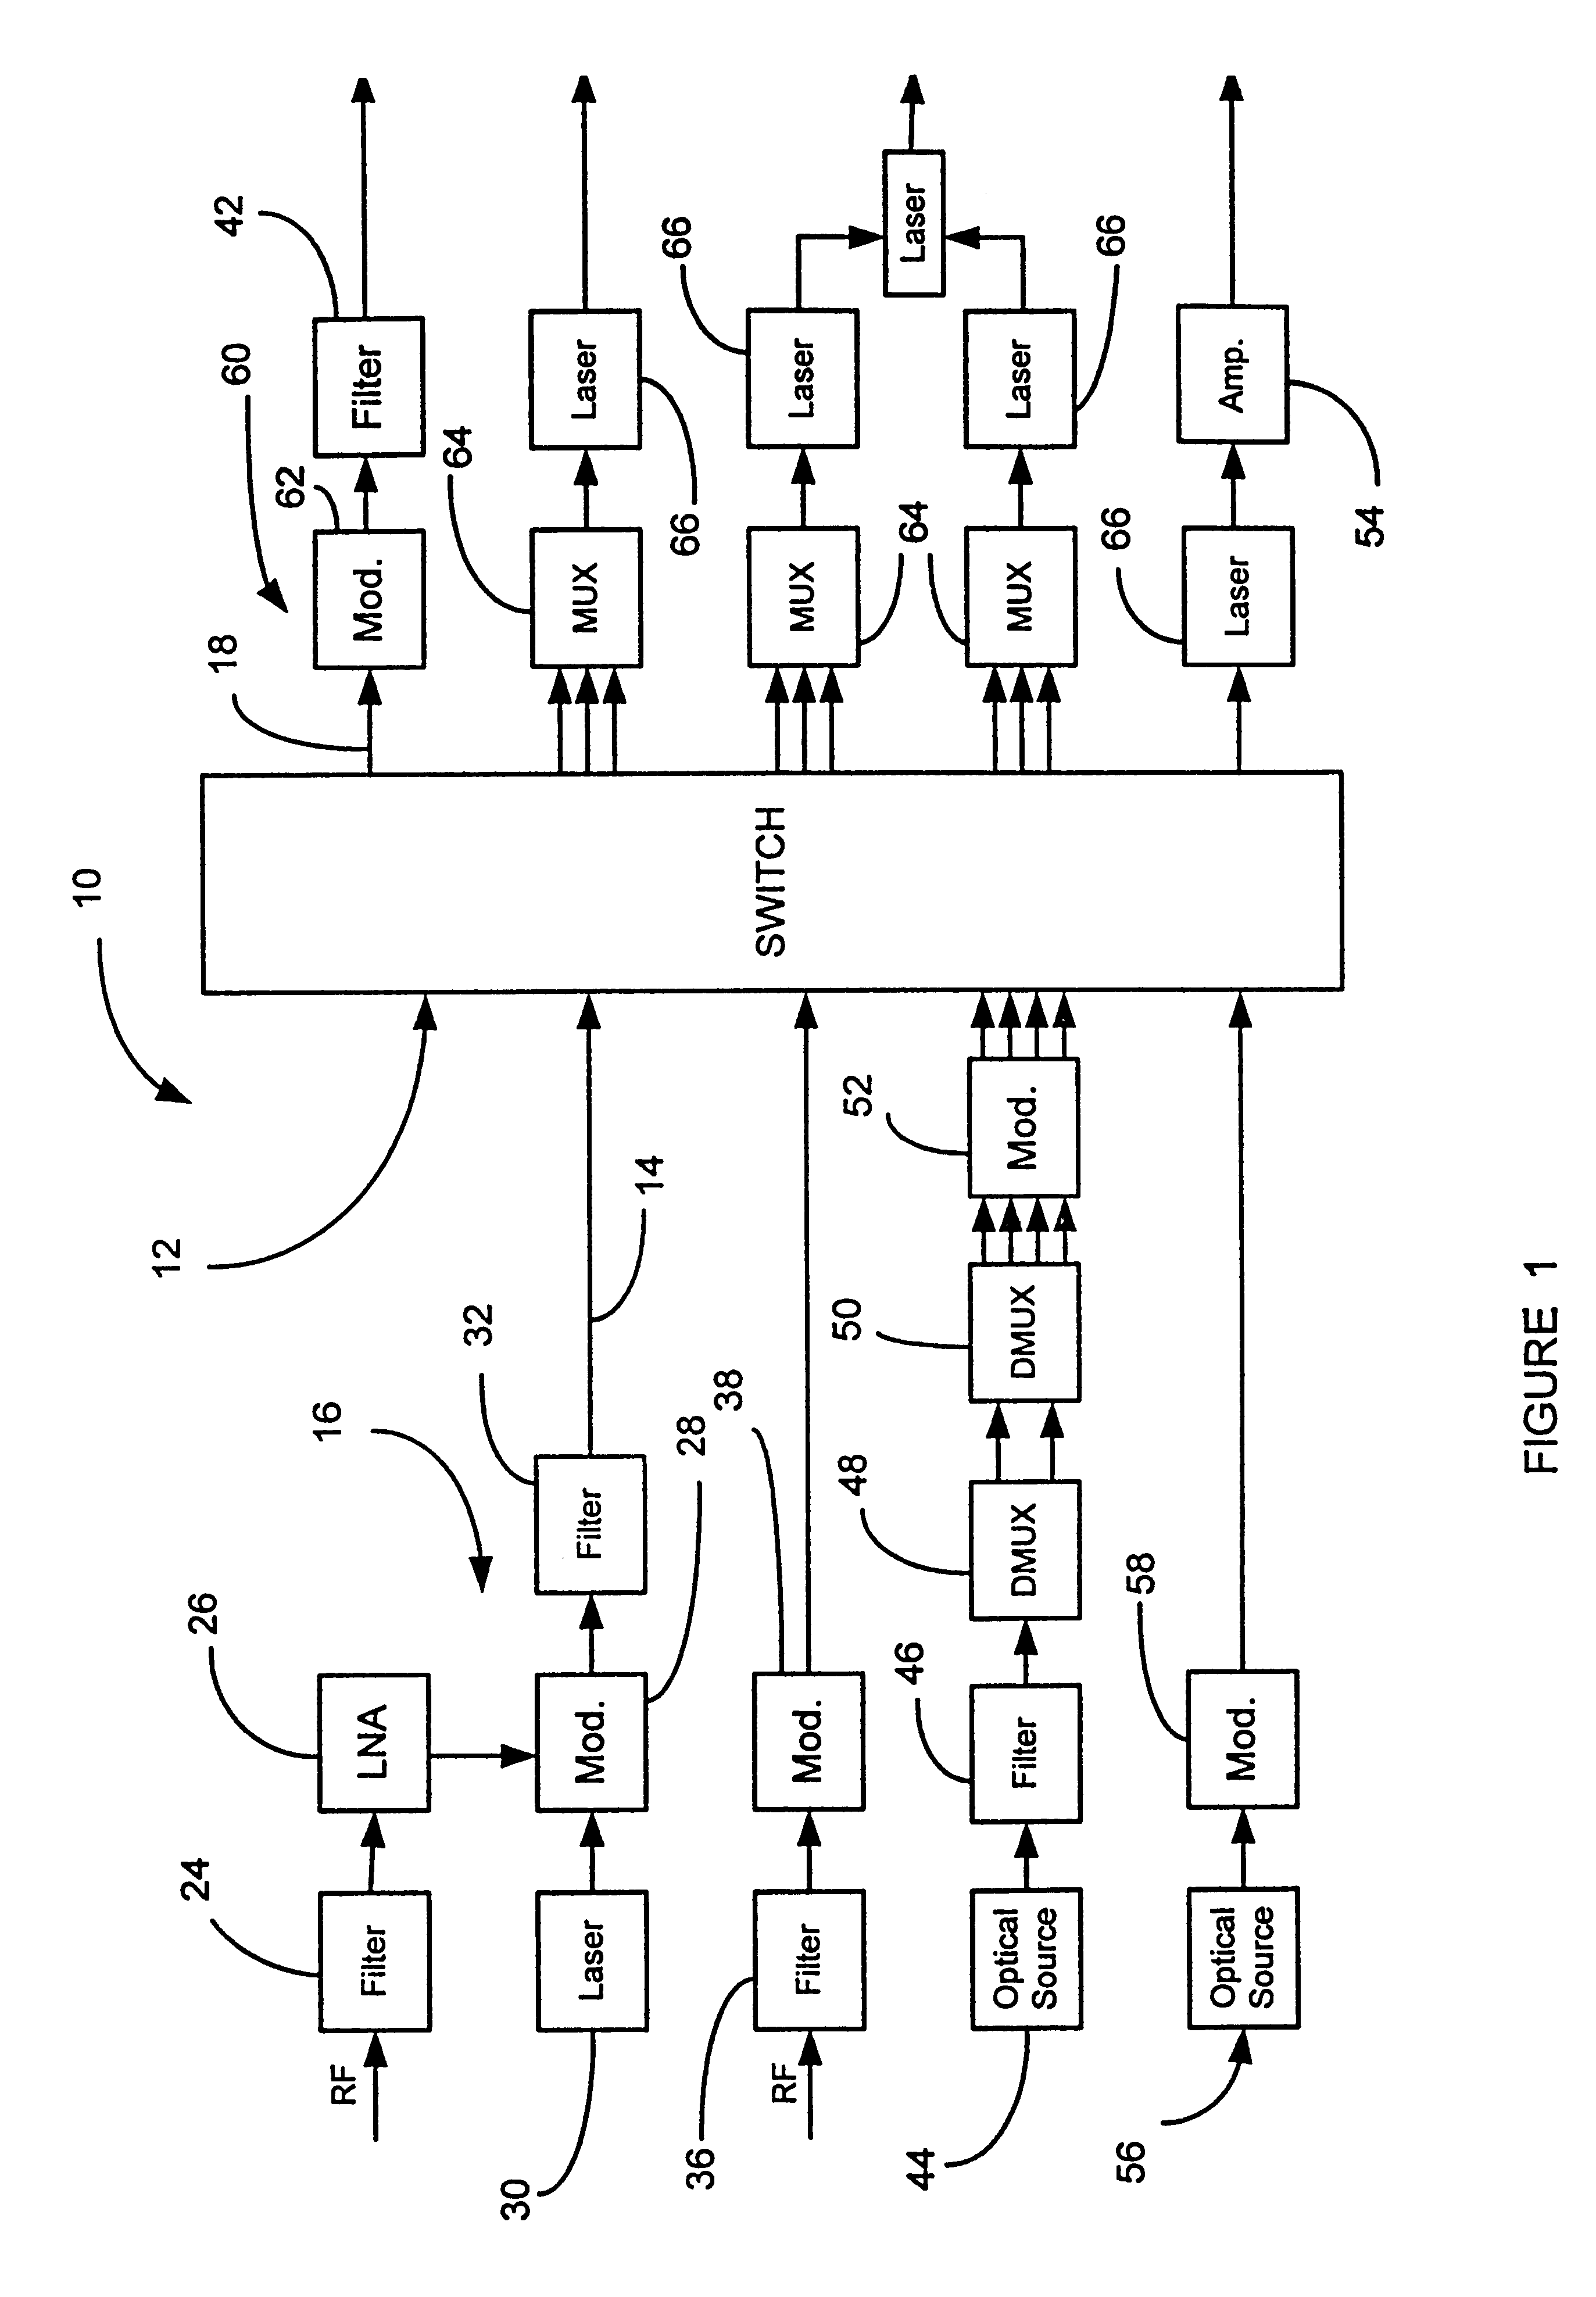 Use of a free space electron switch in a telecommunications network